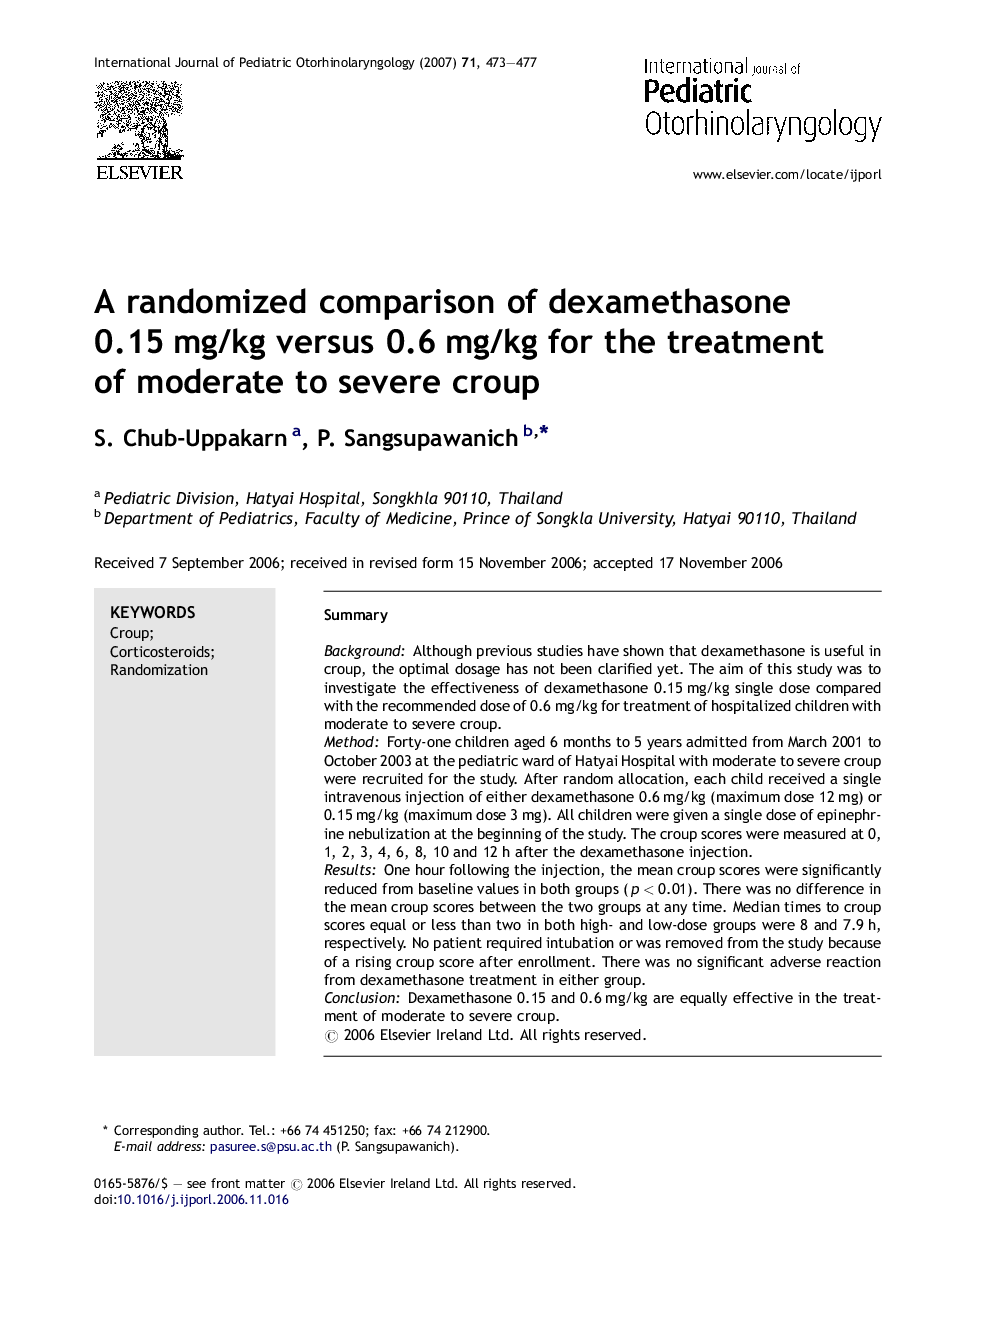 A randomized comparison of dexamethasone 0.15 mg/kg versus 0.6 mg/kg for the treatment of moderate to severe croup